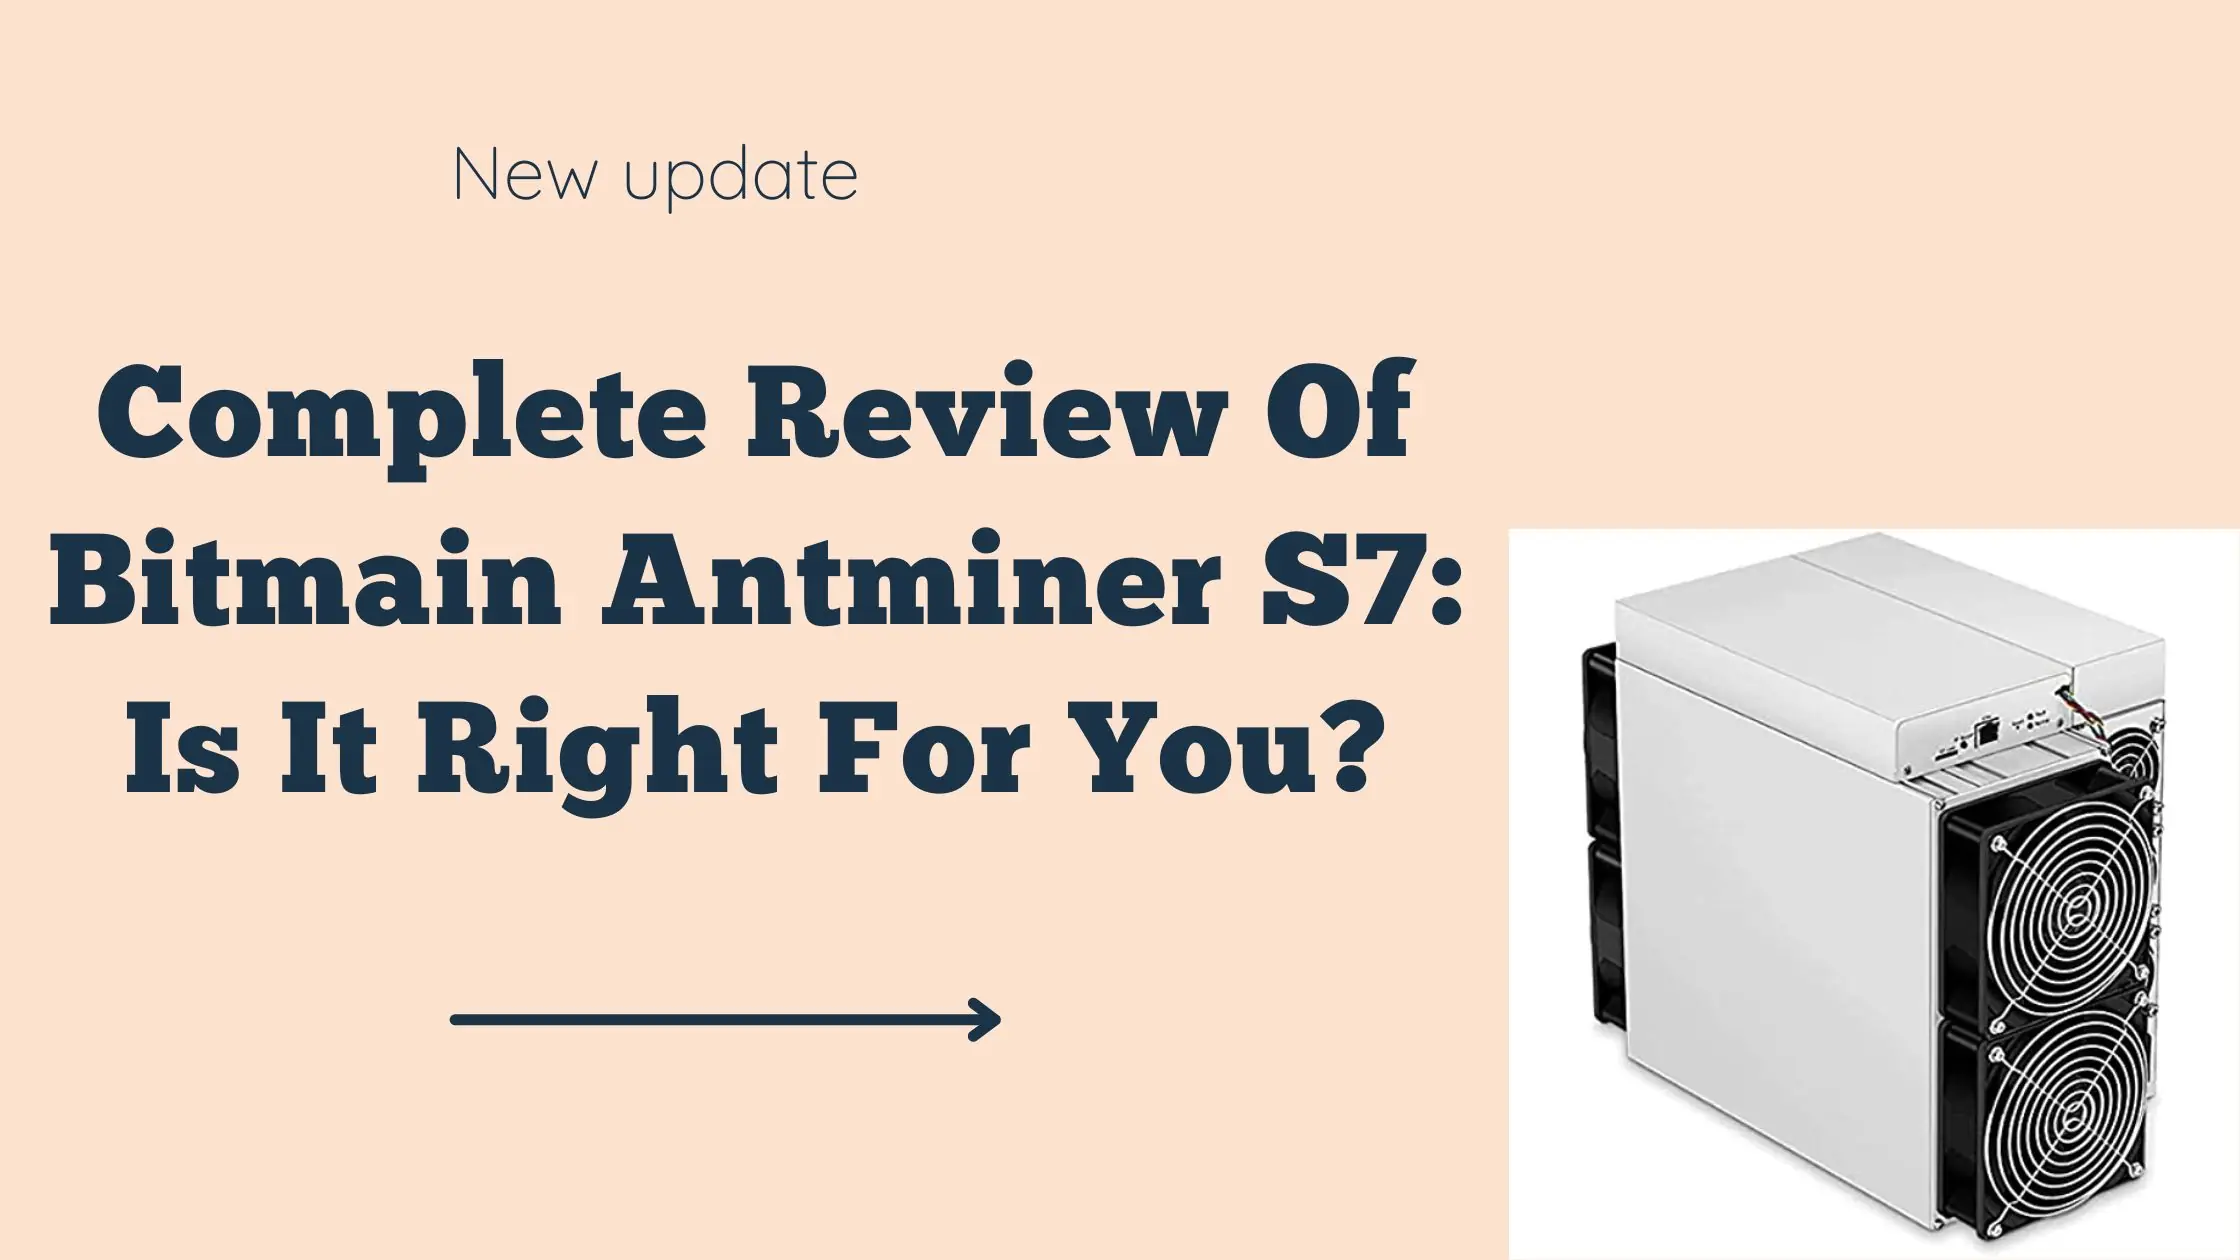 Complete Review Of Bitmain Antminer S7: Is It Right For You?